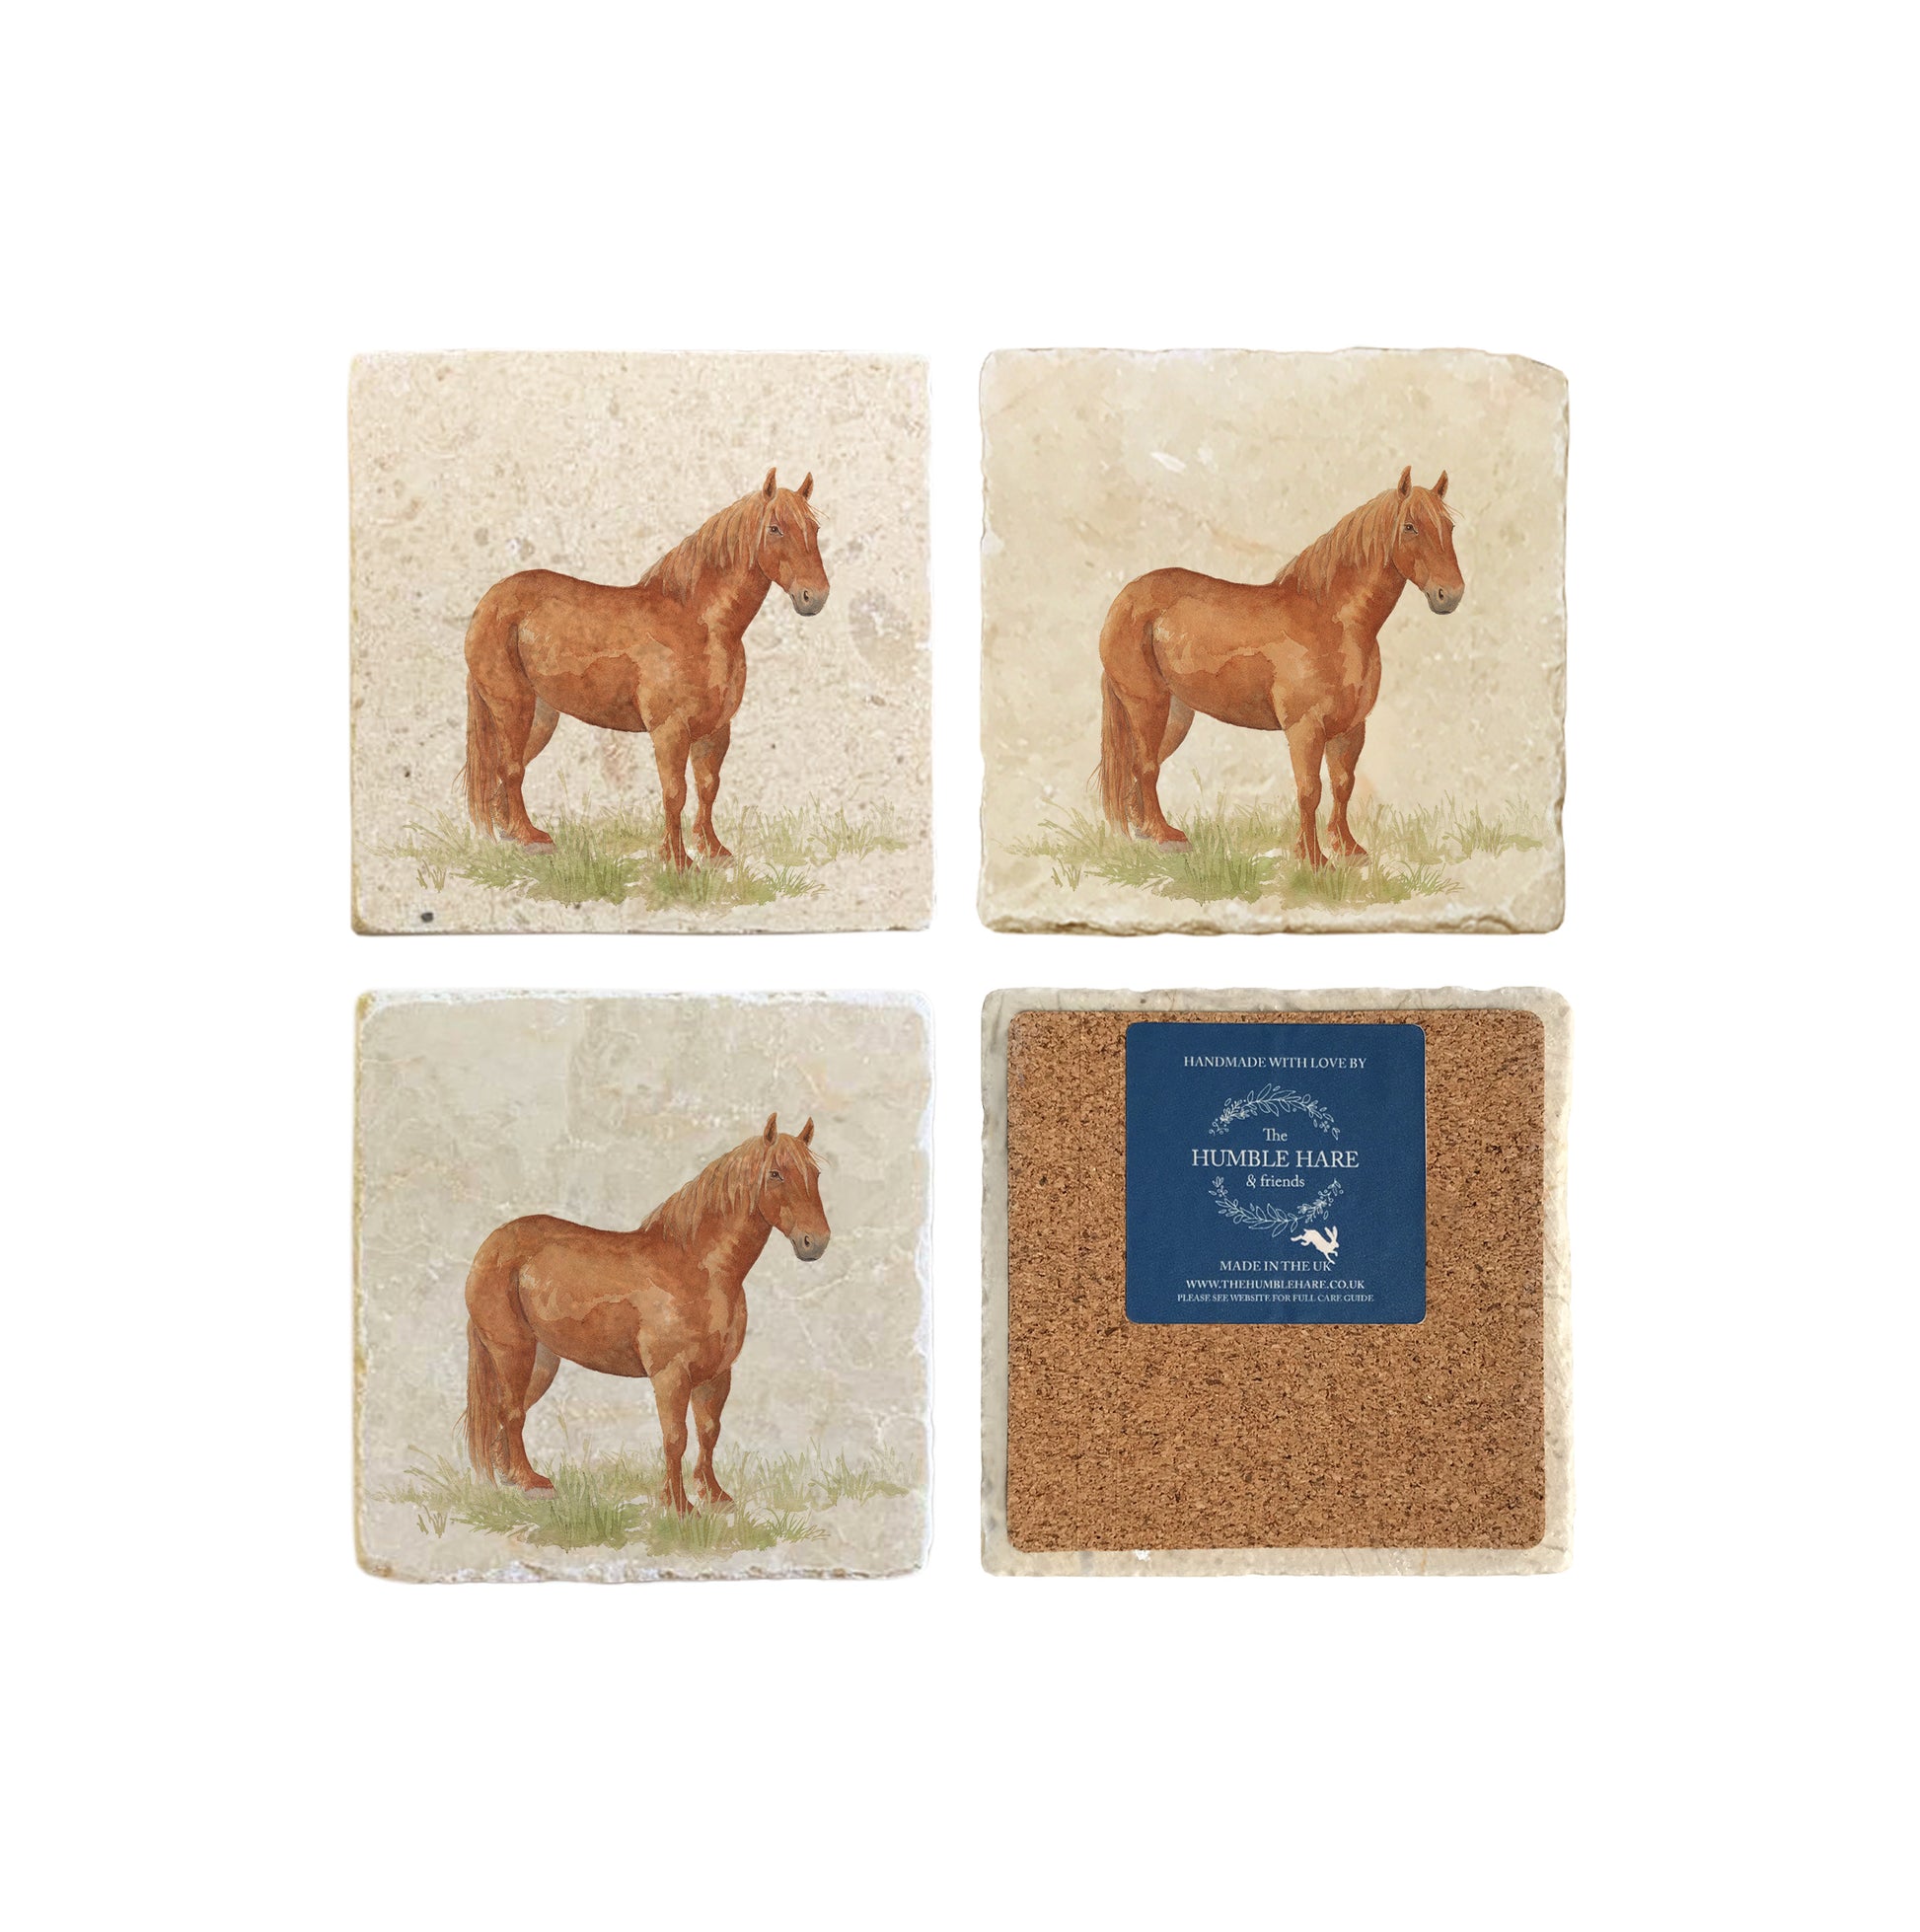 A set of 4 square marble coasters, featuring a watercolour design of a Suffolk Punch horse. One coaster is flipped to show that the coasters are backed with cork.